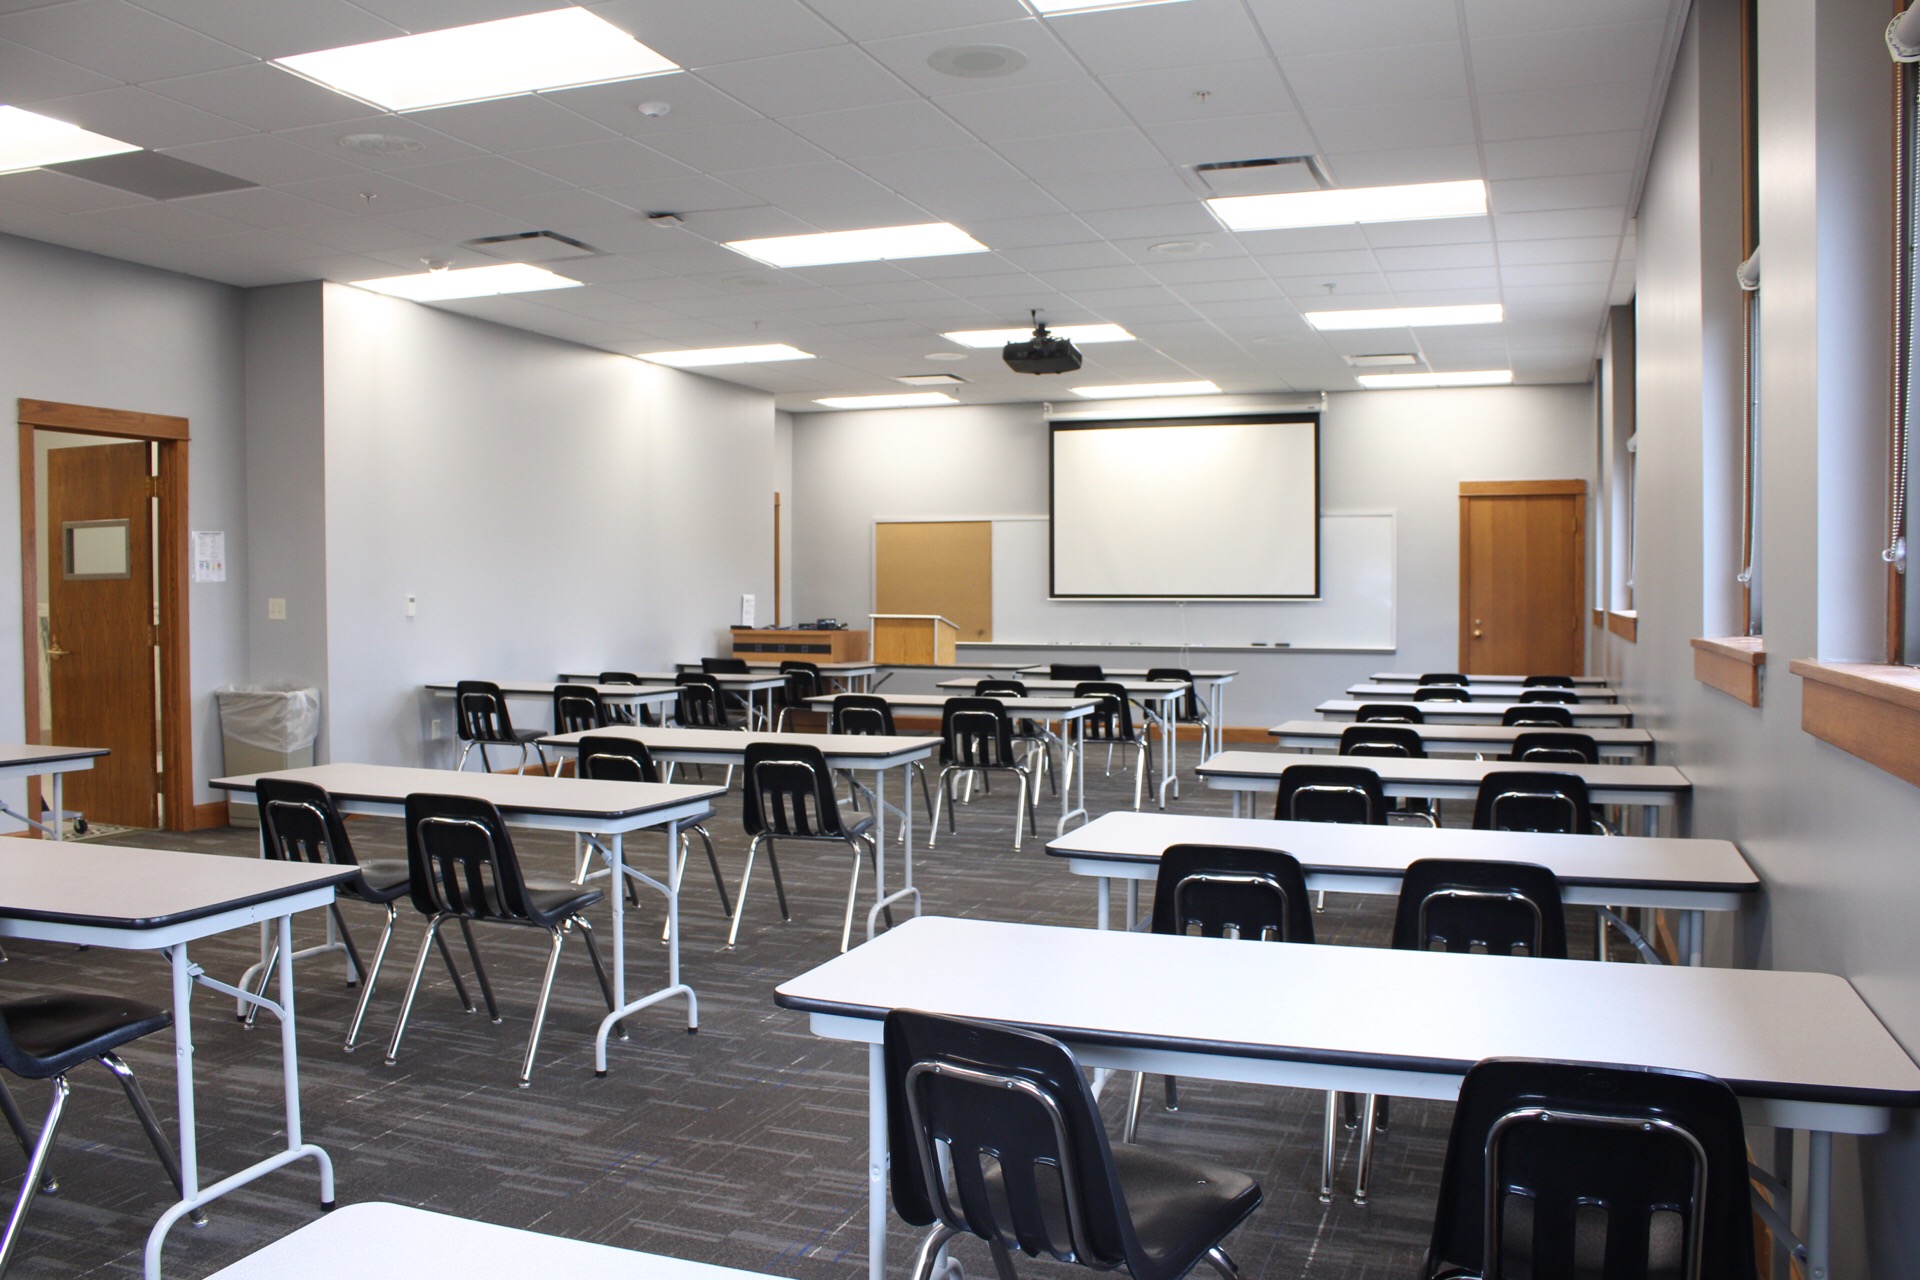 TJ Majors 326 has tables, chairs, an a/v cart, a portable podium, a large combination whiteboard/bulletin board, a ceiling mounted projector and a white projection screen.